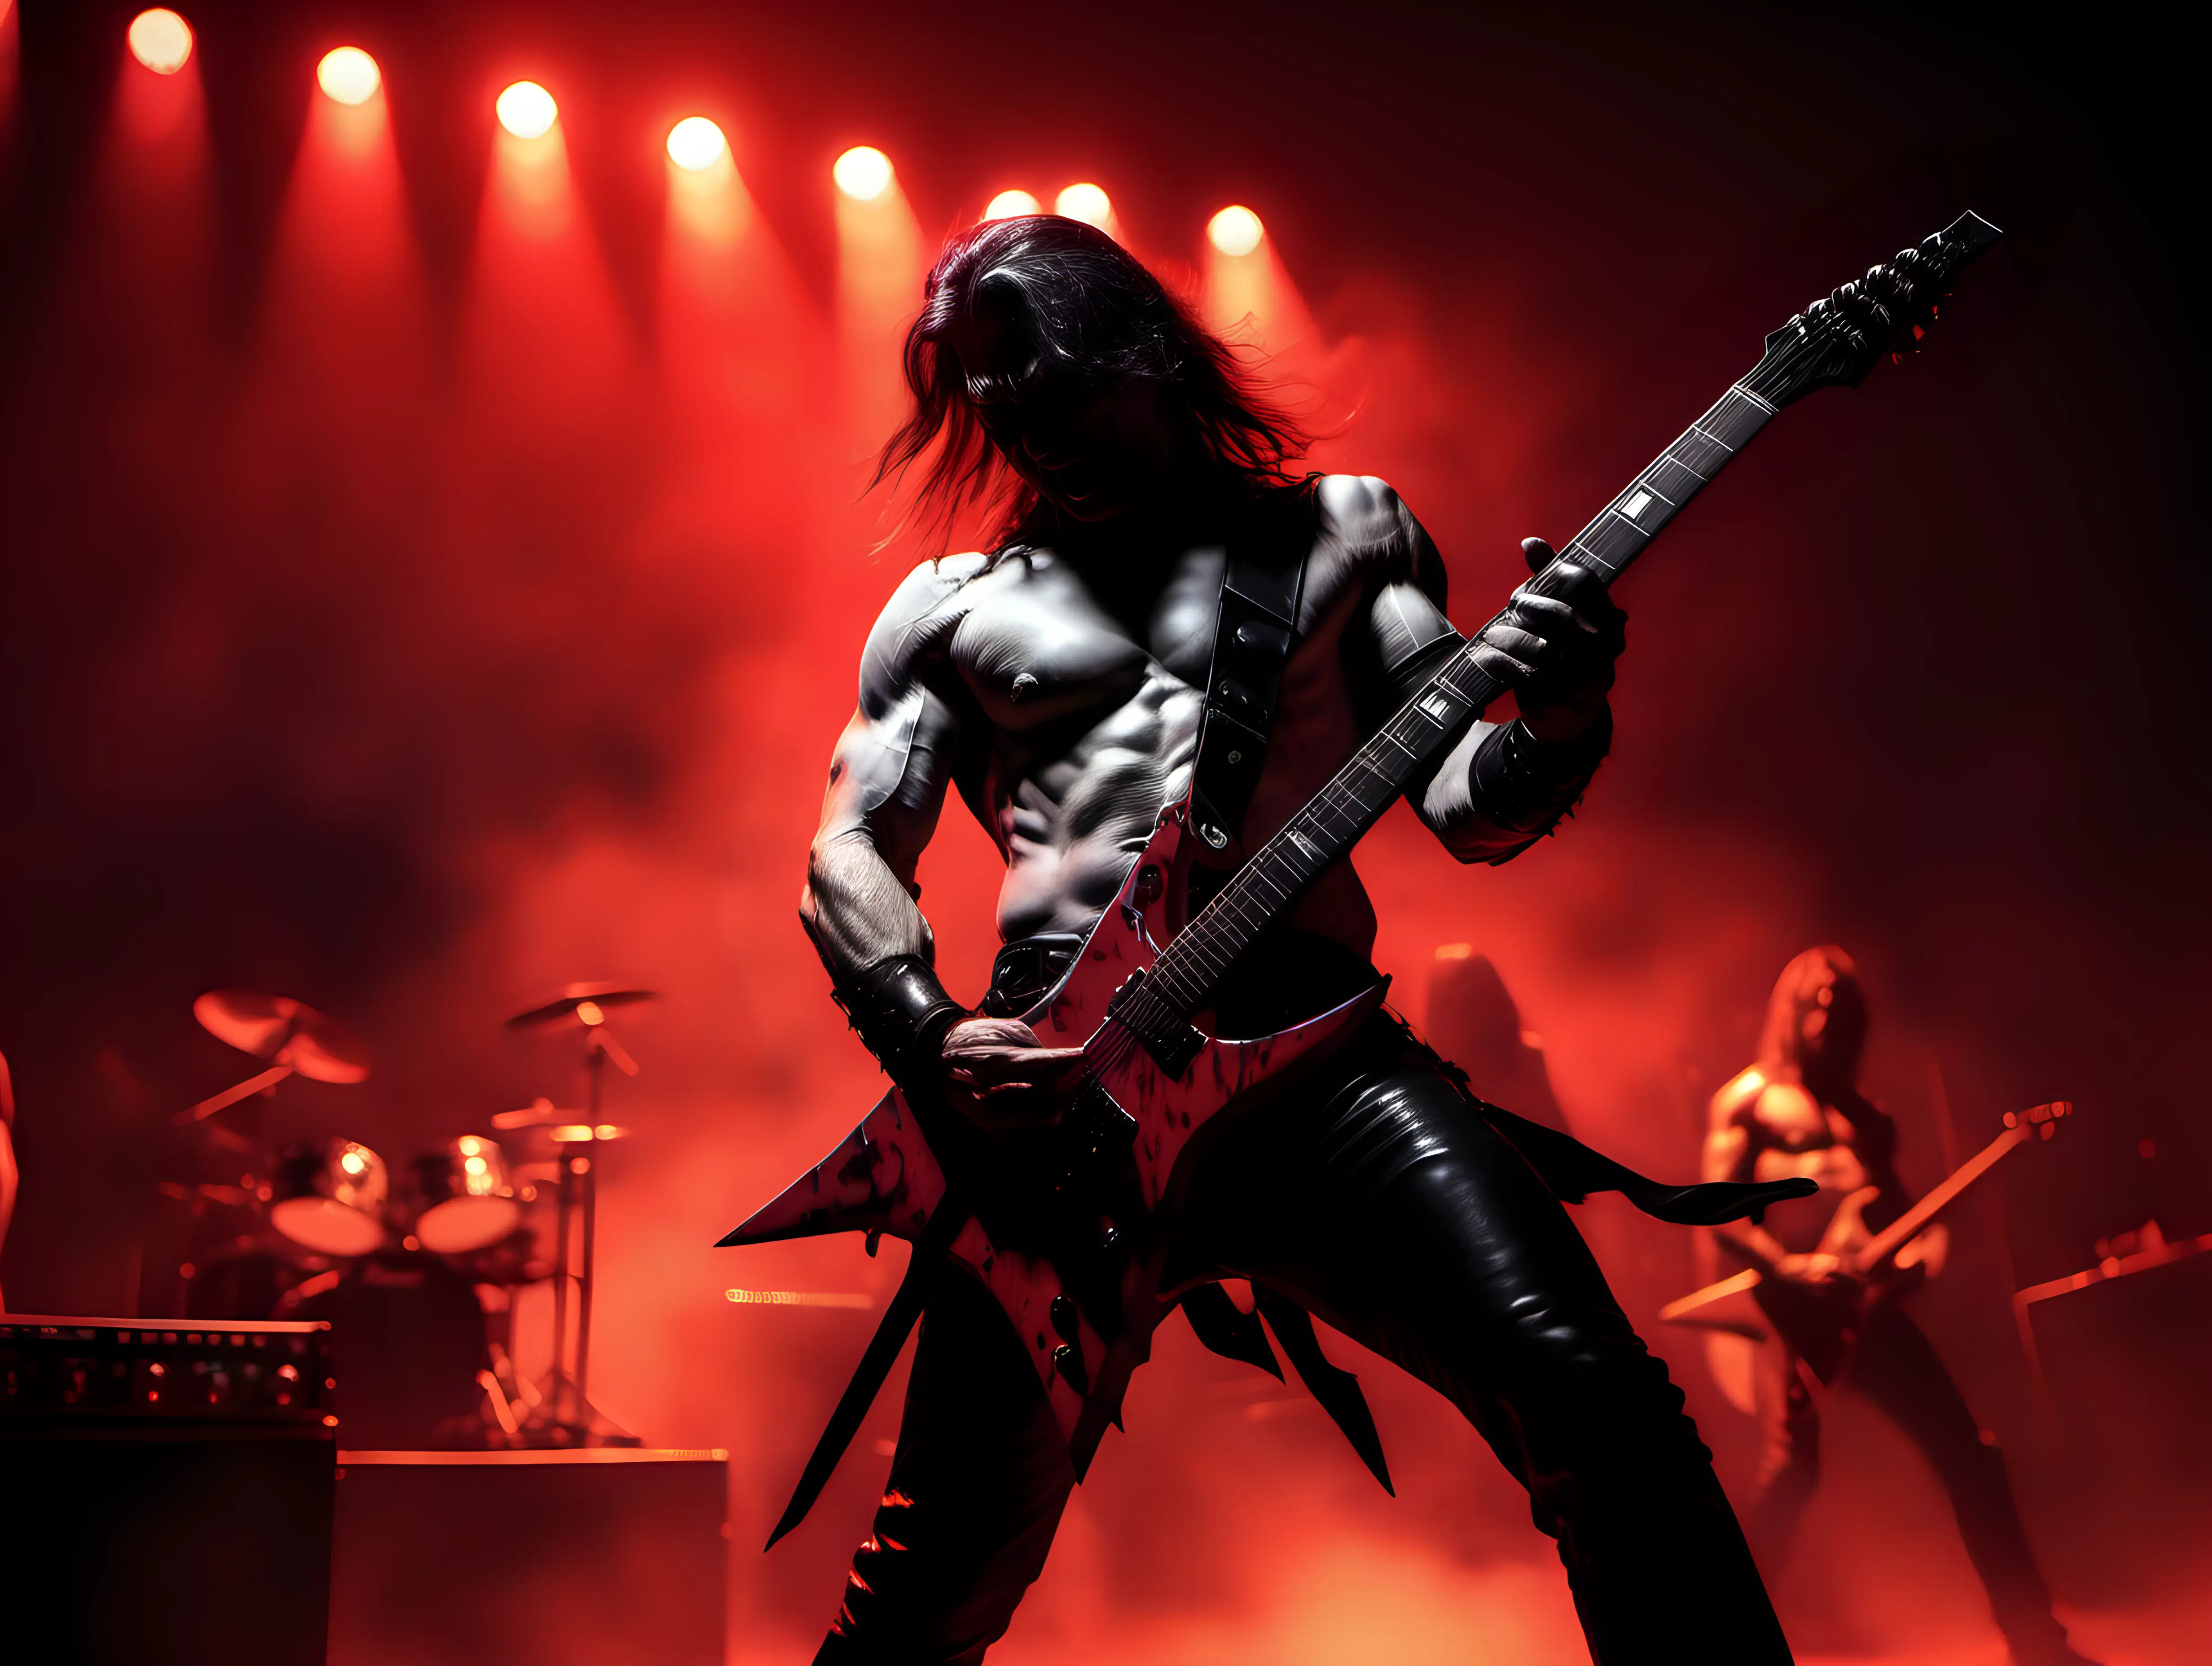 Heavy metal guitarist soloing on stage with red light coming from behind  Frank Frazetta style